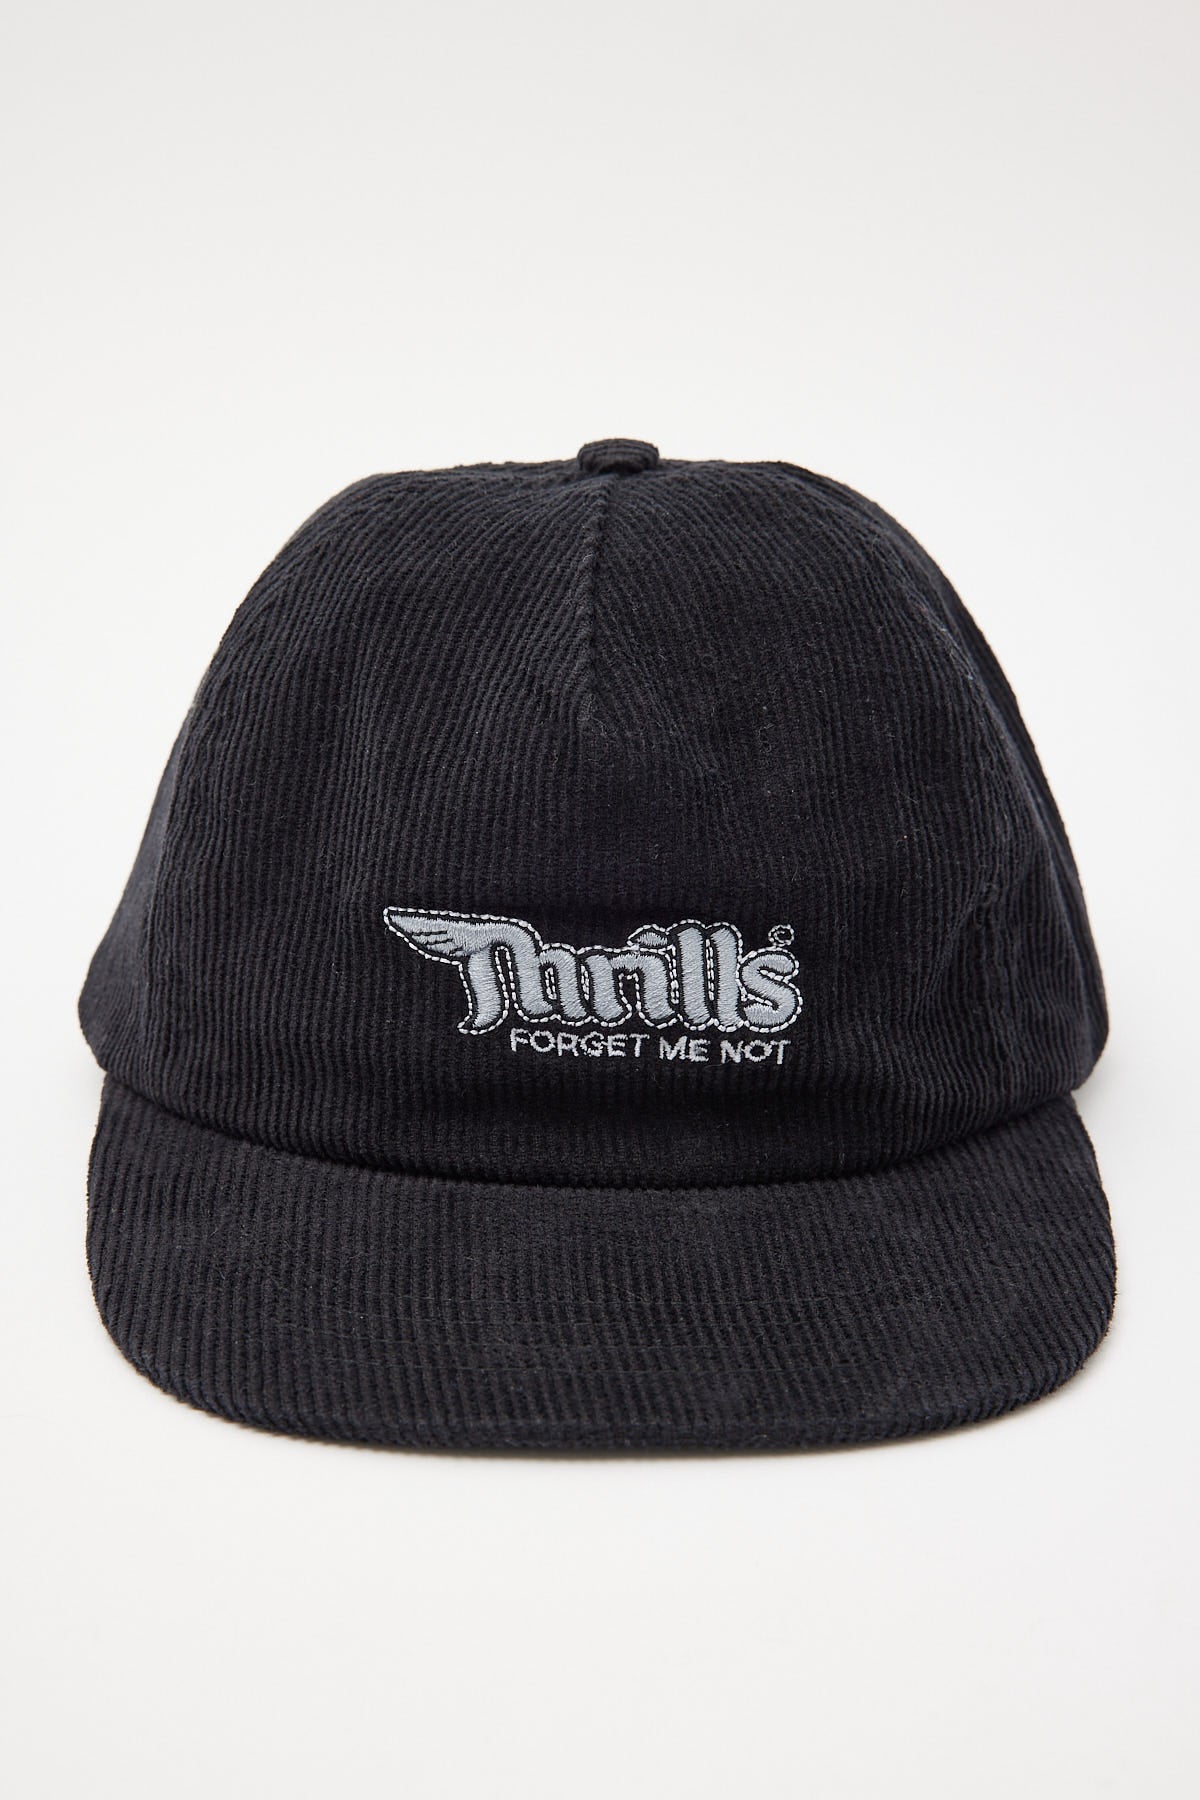 Thrills Forget Me Not Cap Black Cord